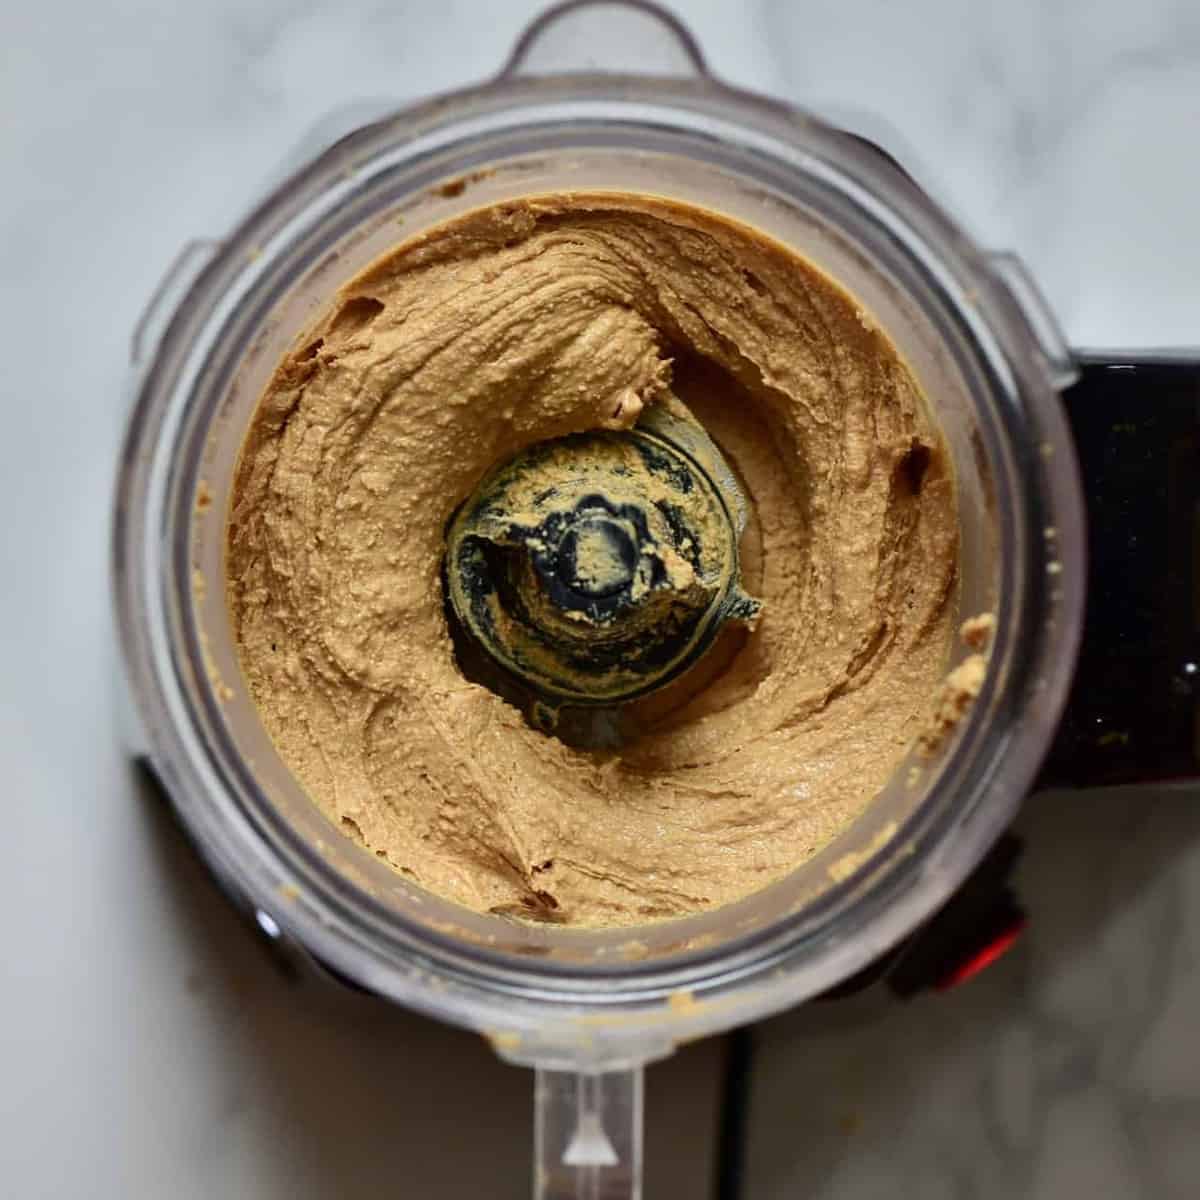 Delicious one inredinet homemade cashew butter recipe . Inlcuding flavoured cashew butter options as well as how to use cashew butter 